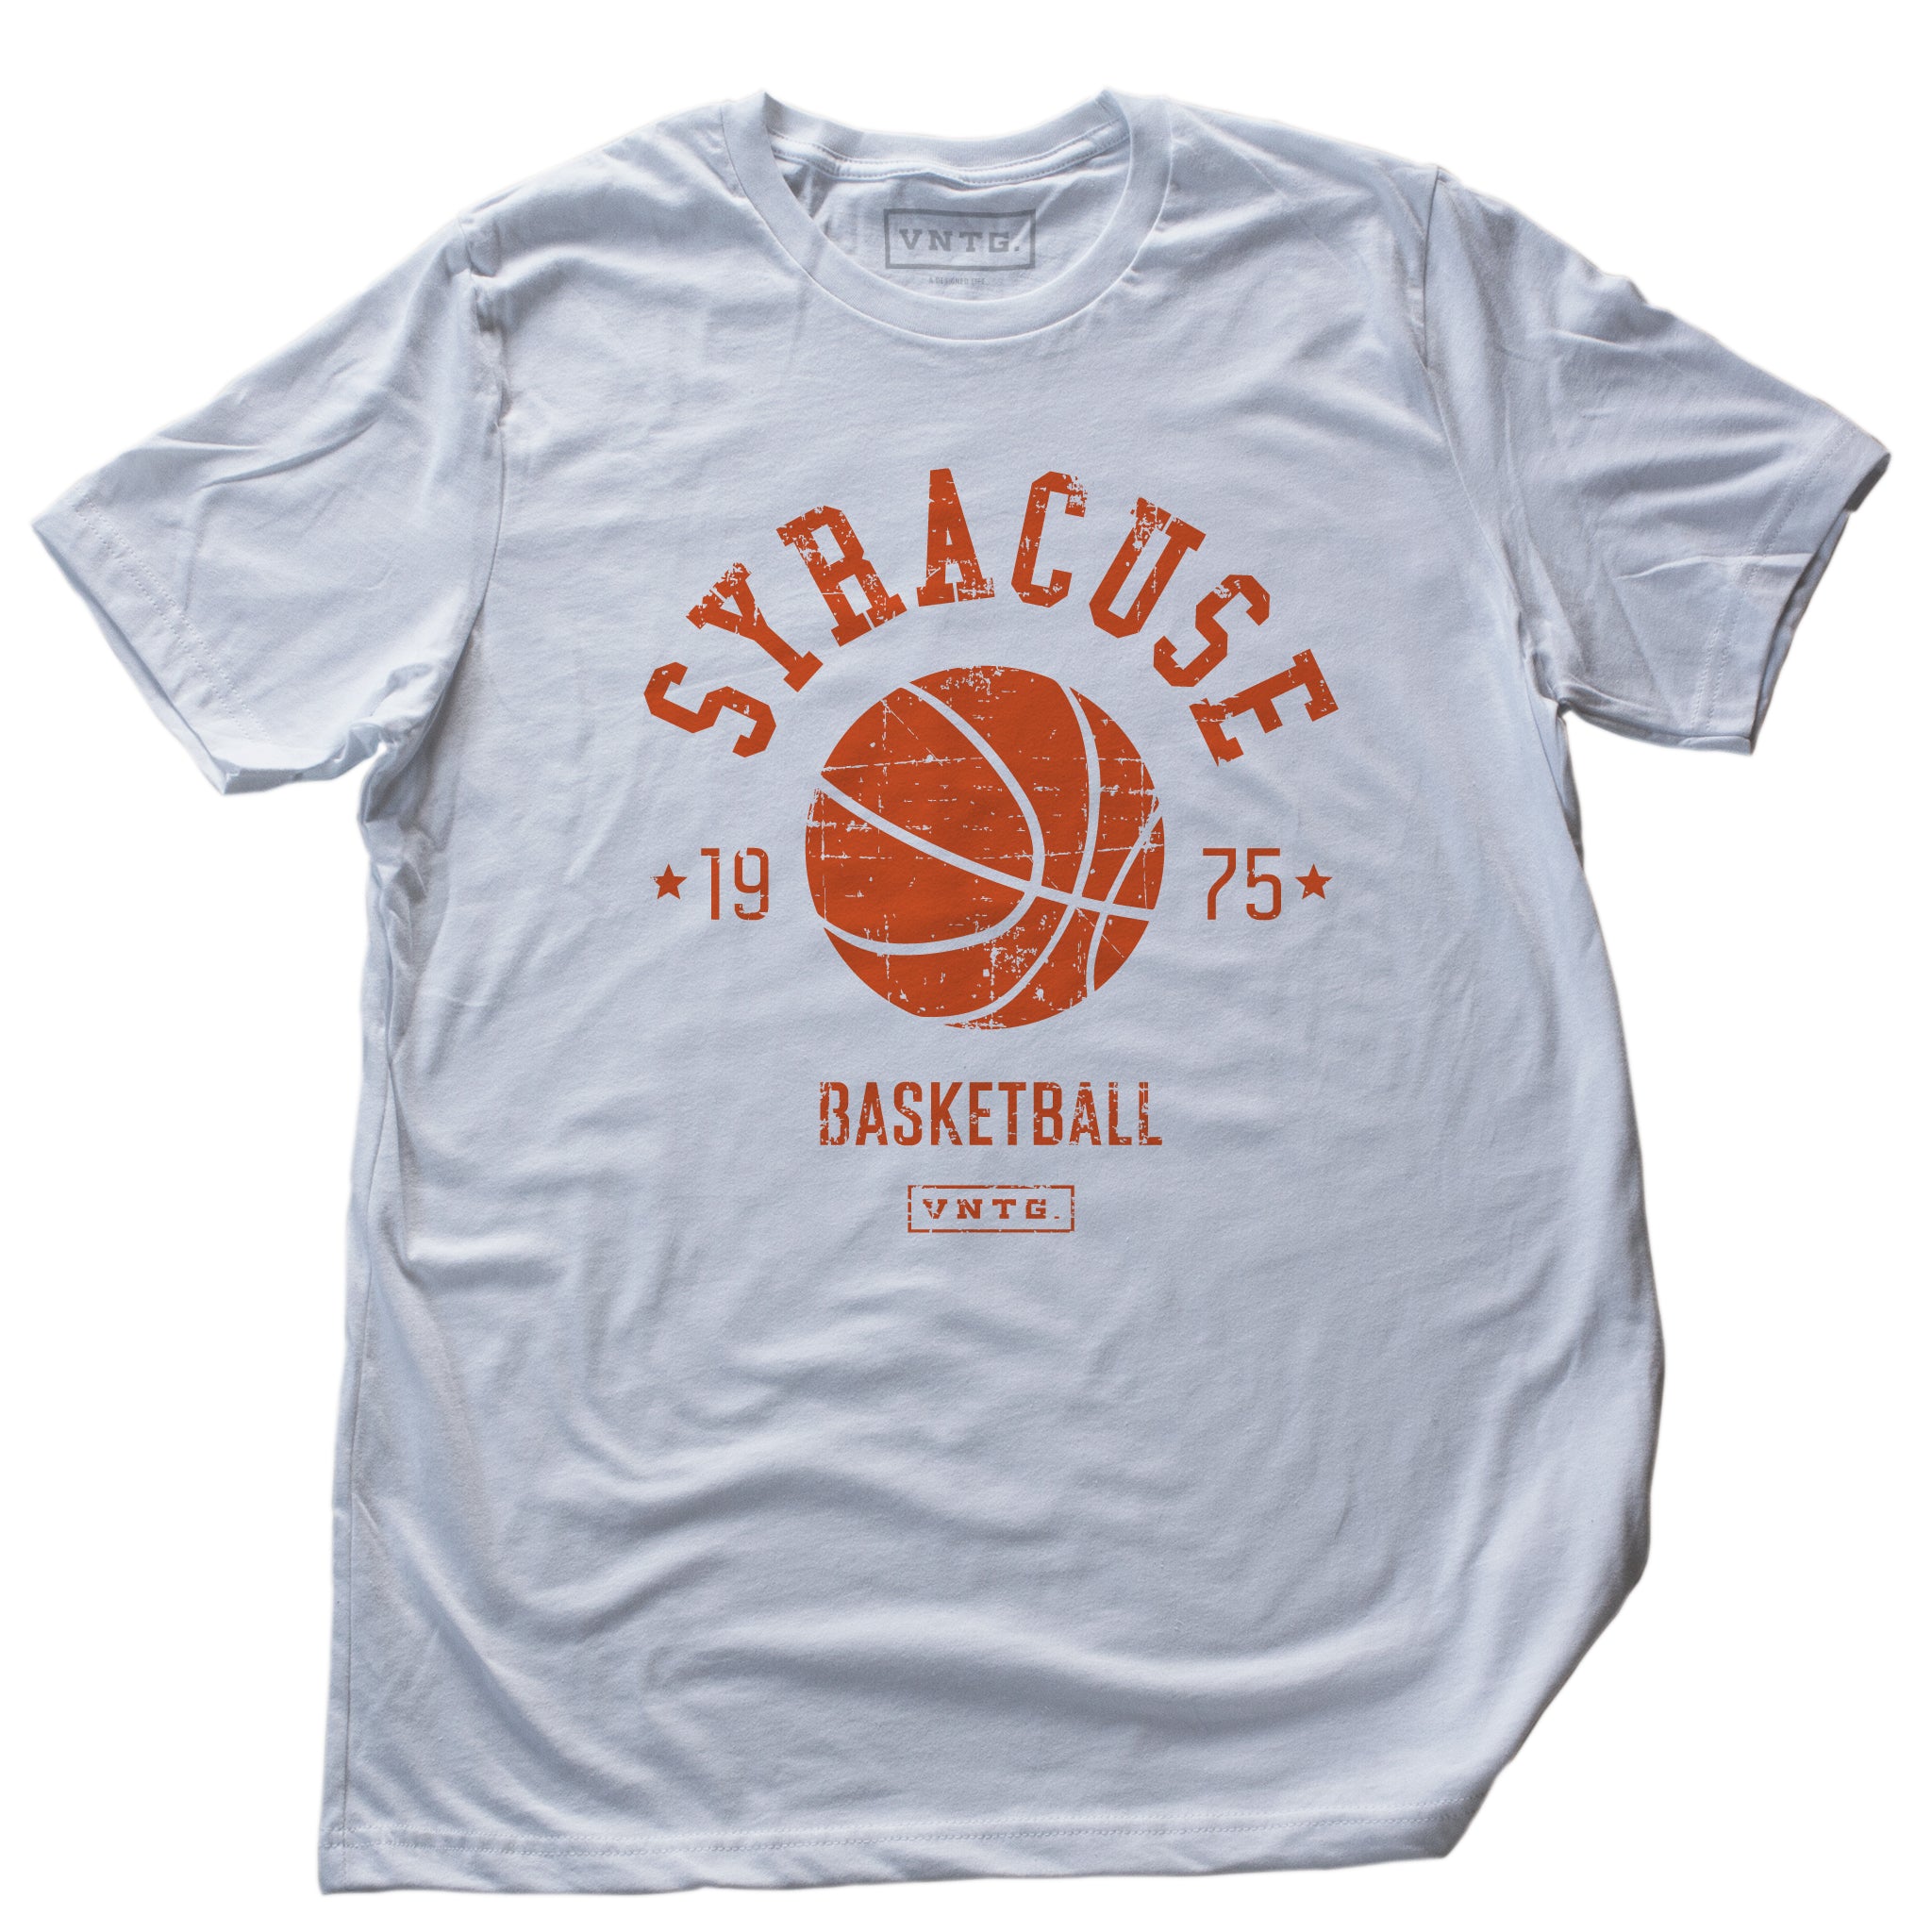 A vintage inspired, retro t-shirt for the Syracuse University Orangemen / Orange basketball team, formerly playing in Manley Fieldhouse, now playing in the Carrier Dome in Syracuse, New York. The shirt features a basketball graphic, surrounded by the words “SYRACUSE” and “basketball / 1975” and the VNTG. brand logo. From wolfsaint.net